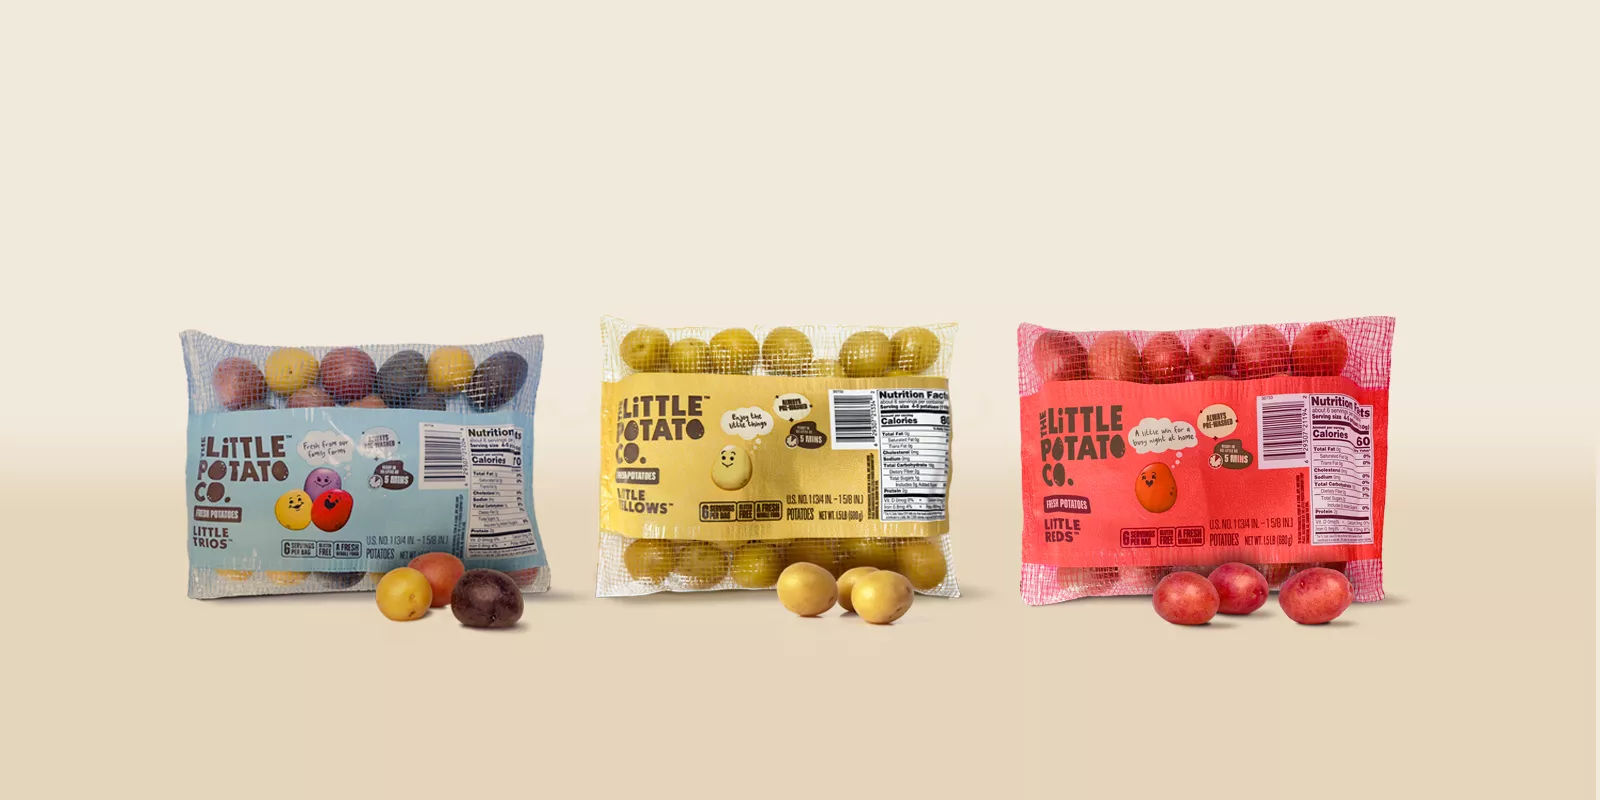 Walmart exclusive 3 mesh bags with various potatoes from the Little Potato Company